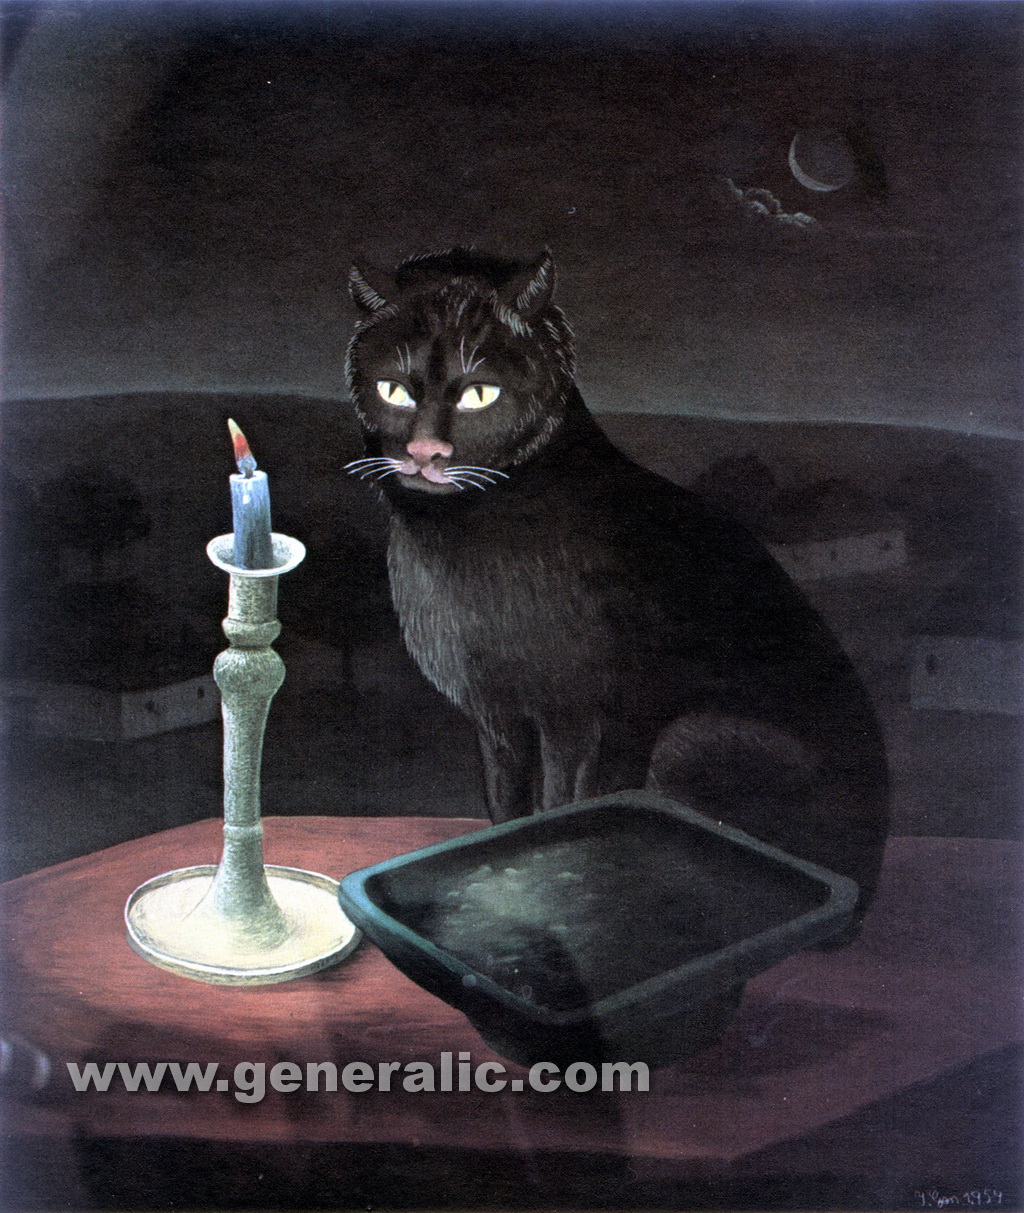 Ivan Generalic, 1954, Cat by candlelight, oil on glass, 42x36 cm